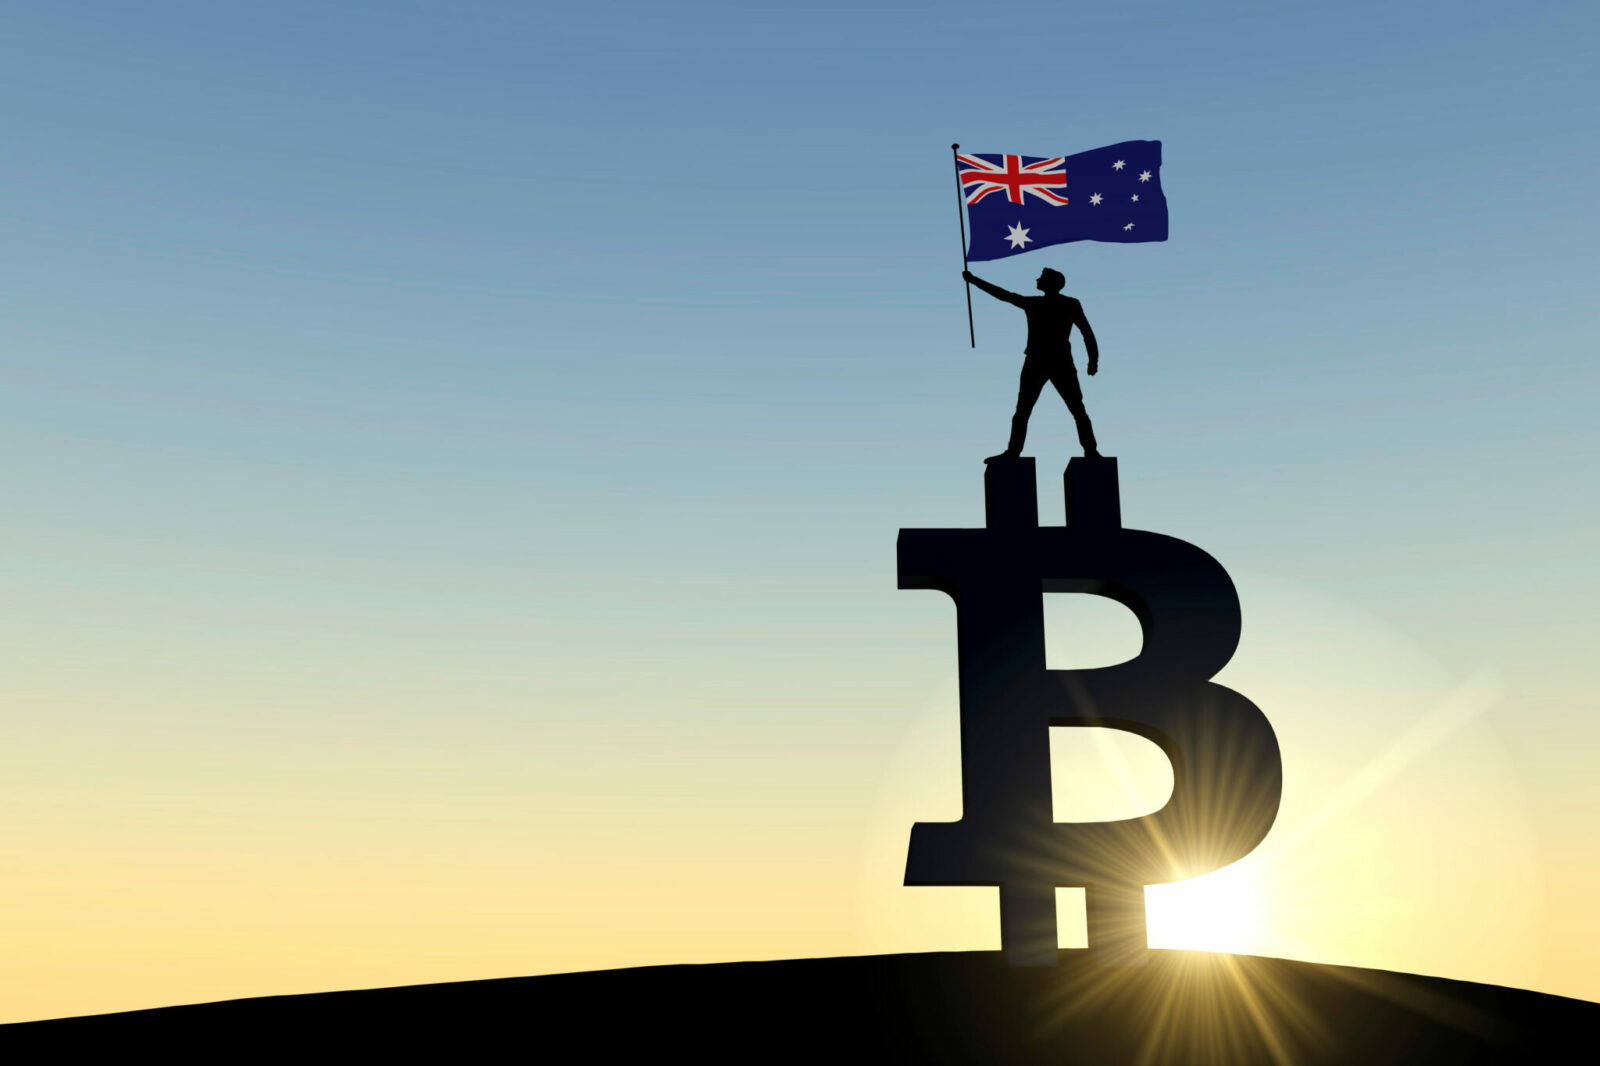 Australian Tax Office Targets Crypto Traders for Tax Compliance